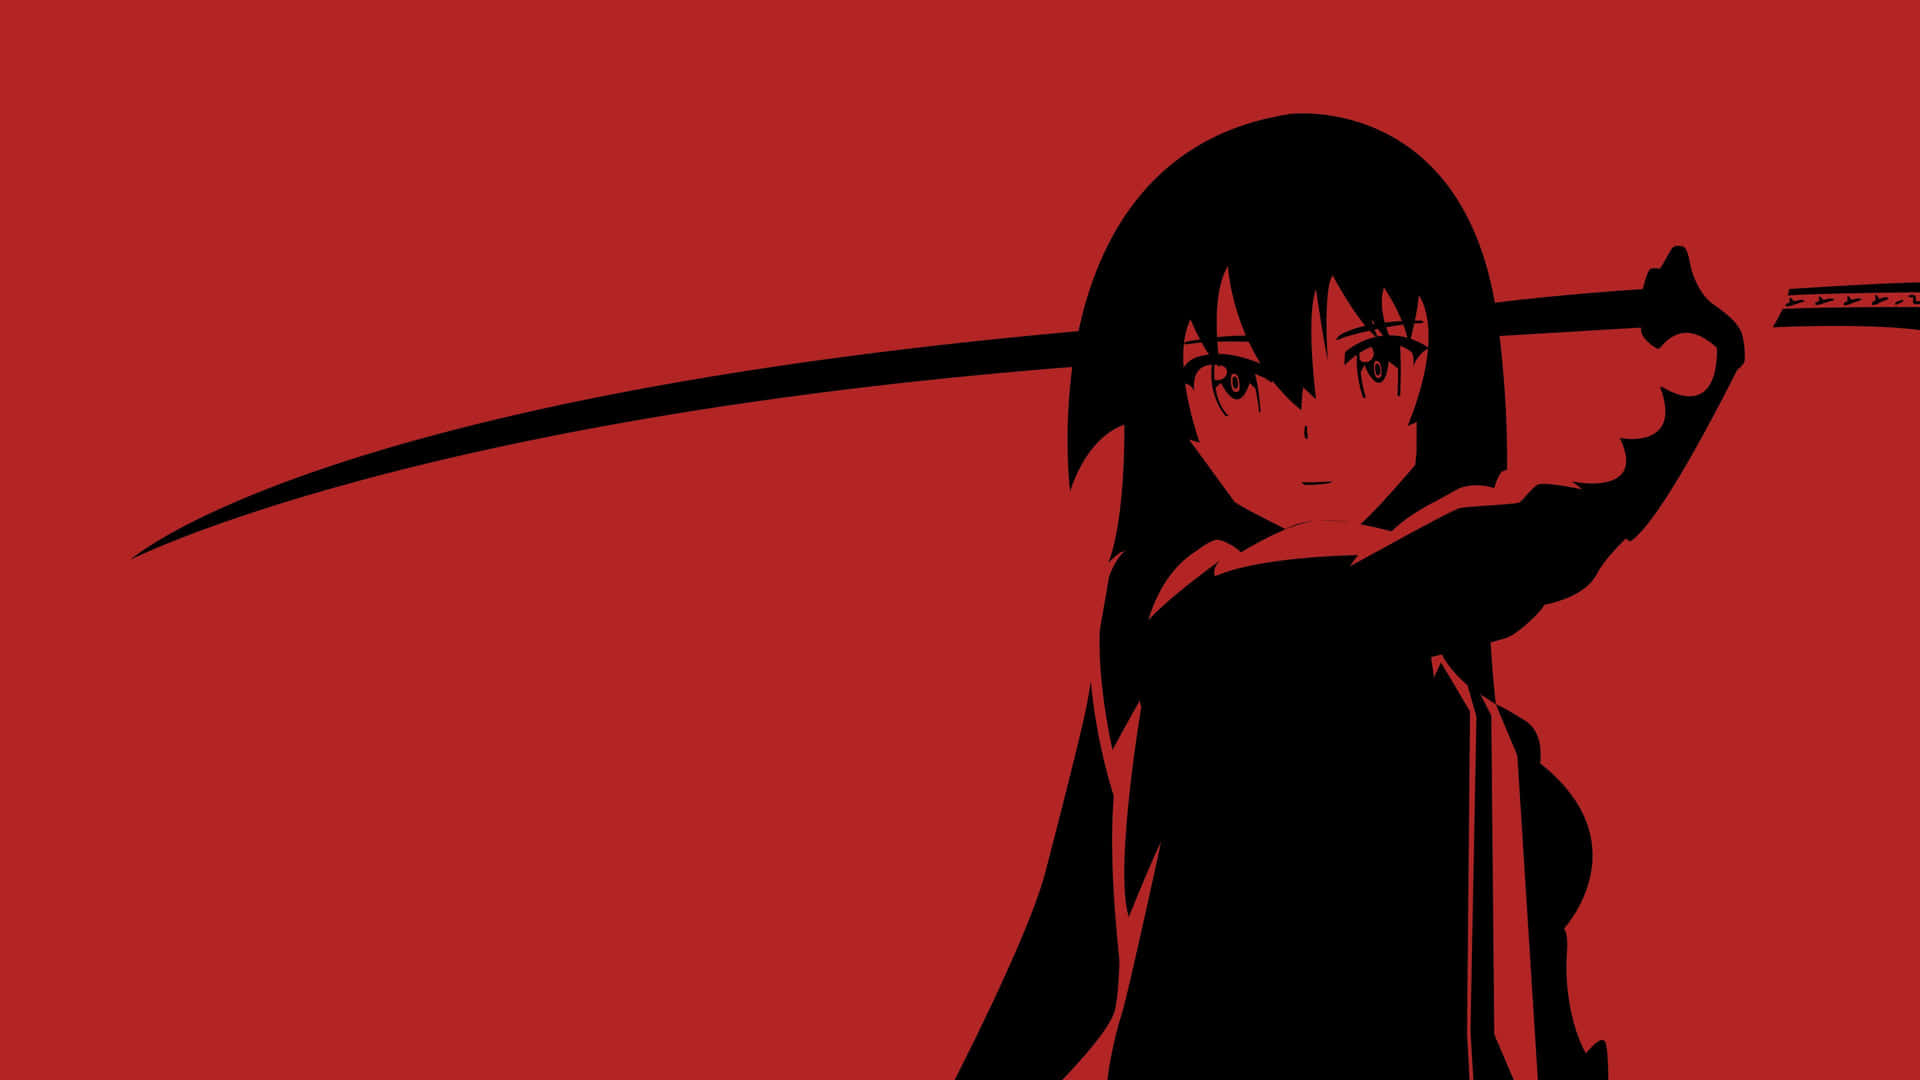 Anime Girl in Hoodie  Red  Black Aesthetic Poster for Sale by Nymmzi   Redbubble